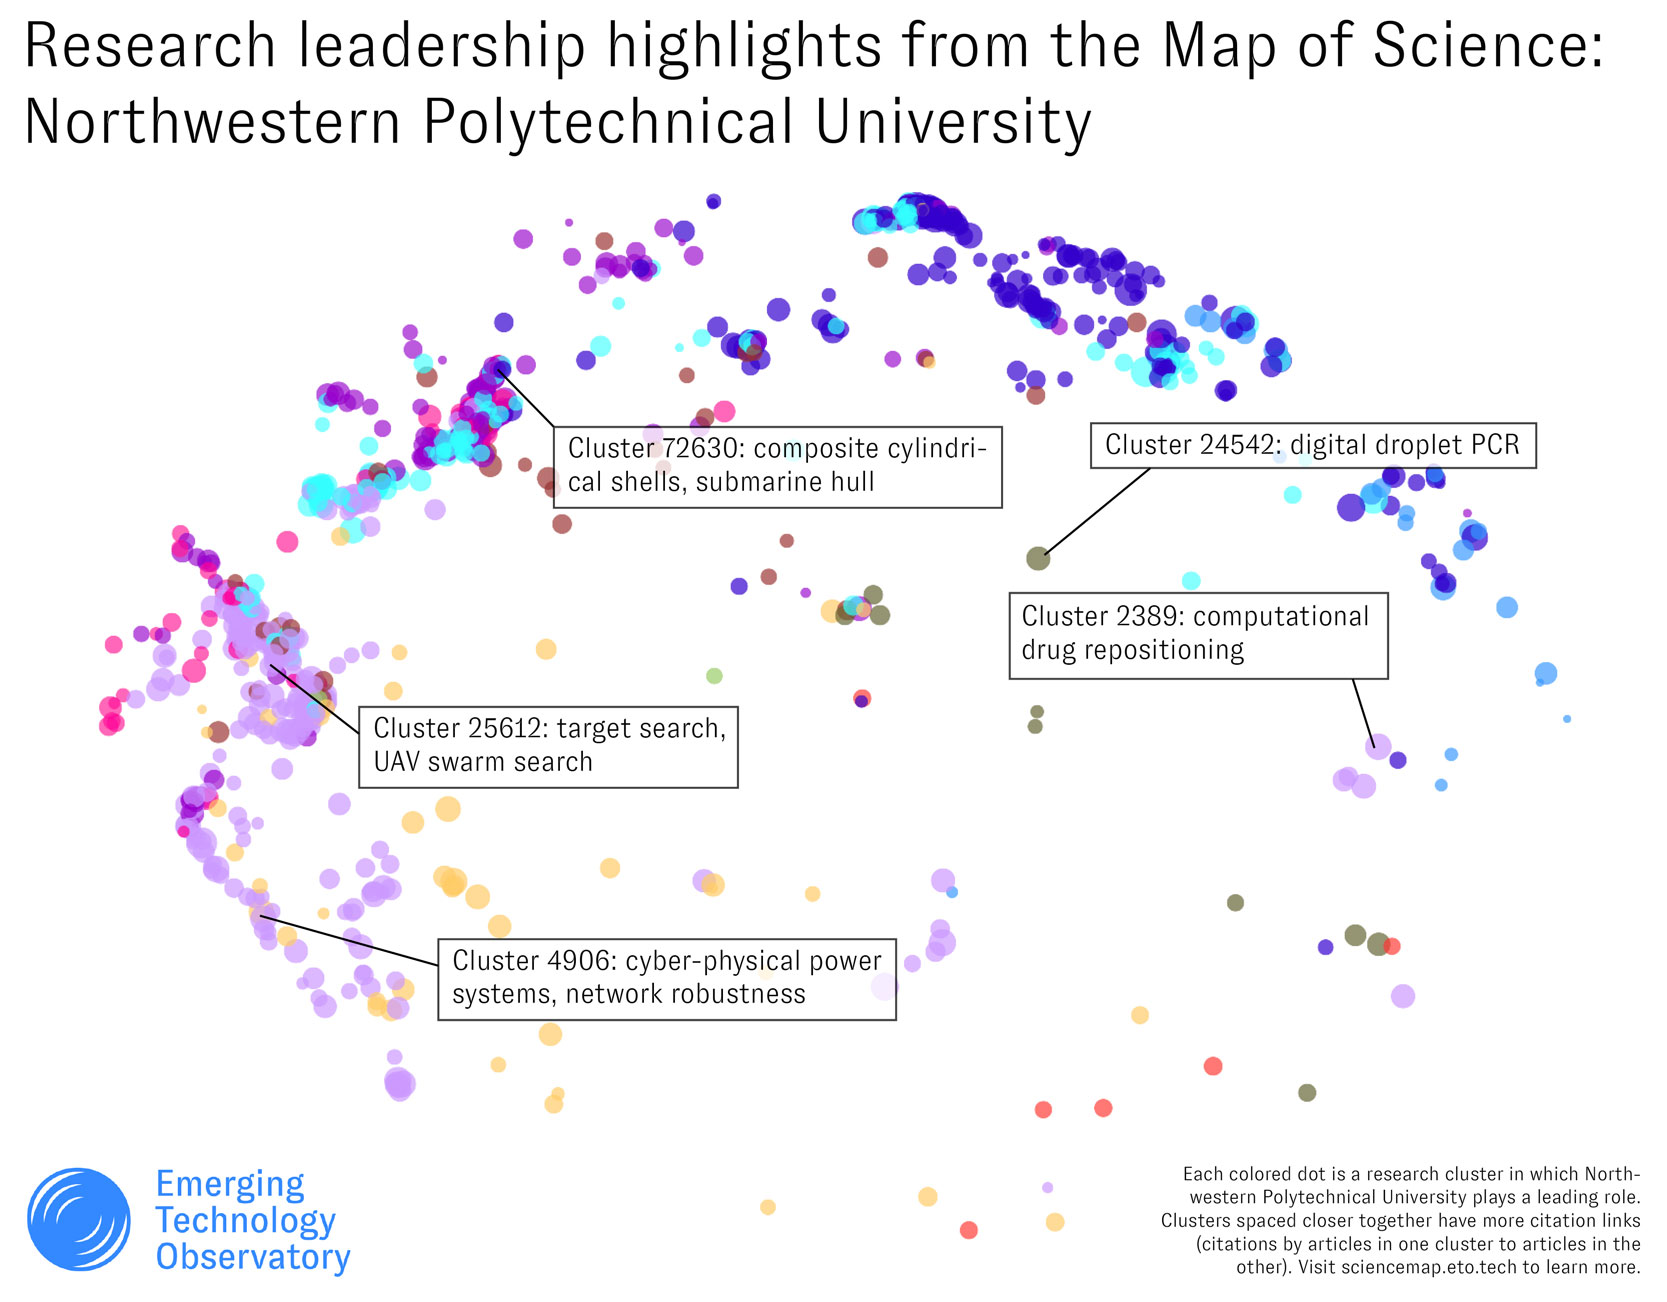 An annotated screenshot of the Map of Science interface, indicating several specific research clusters where Northwestern Polytechnical University is active and the key concepts associated with them.